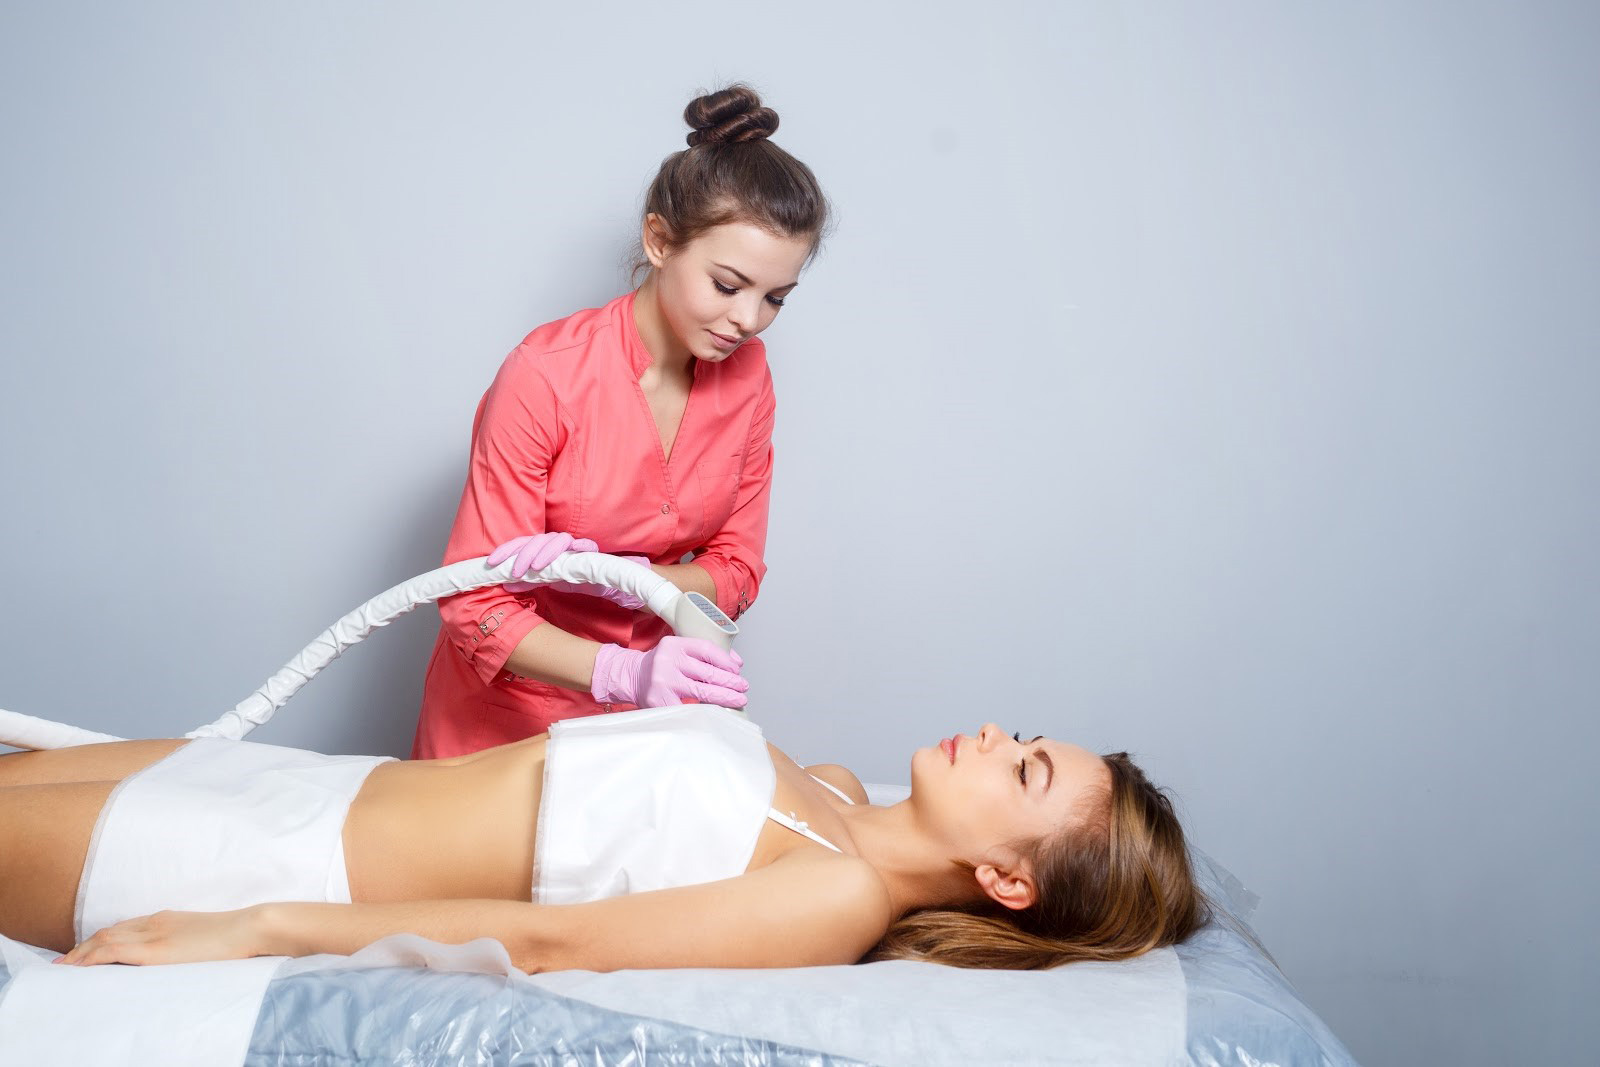 woman laying peacefully while aesthetician performs CoolSculpting procedure